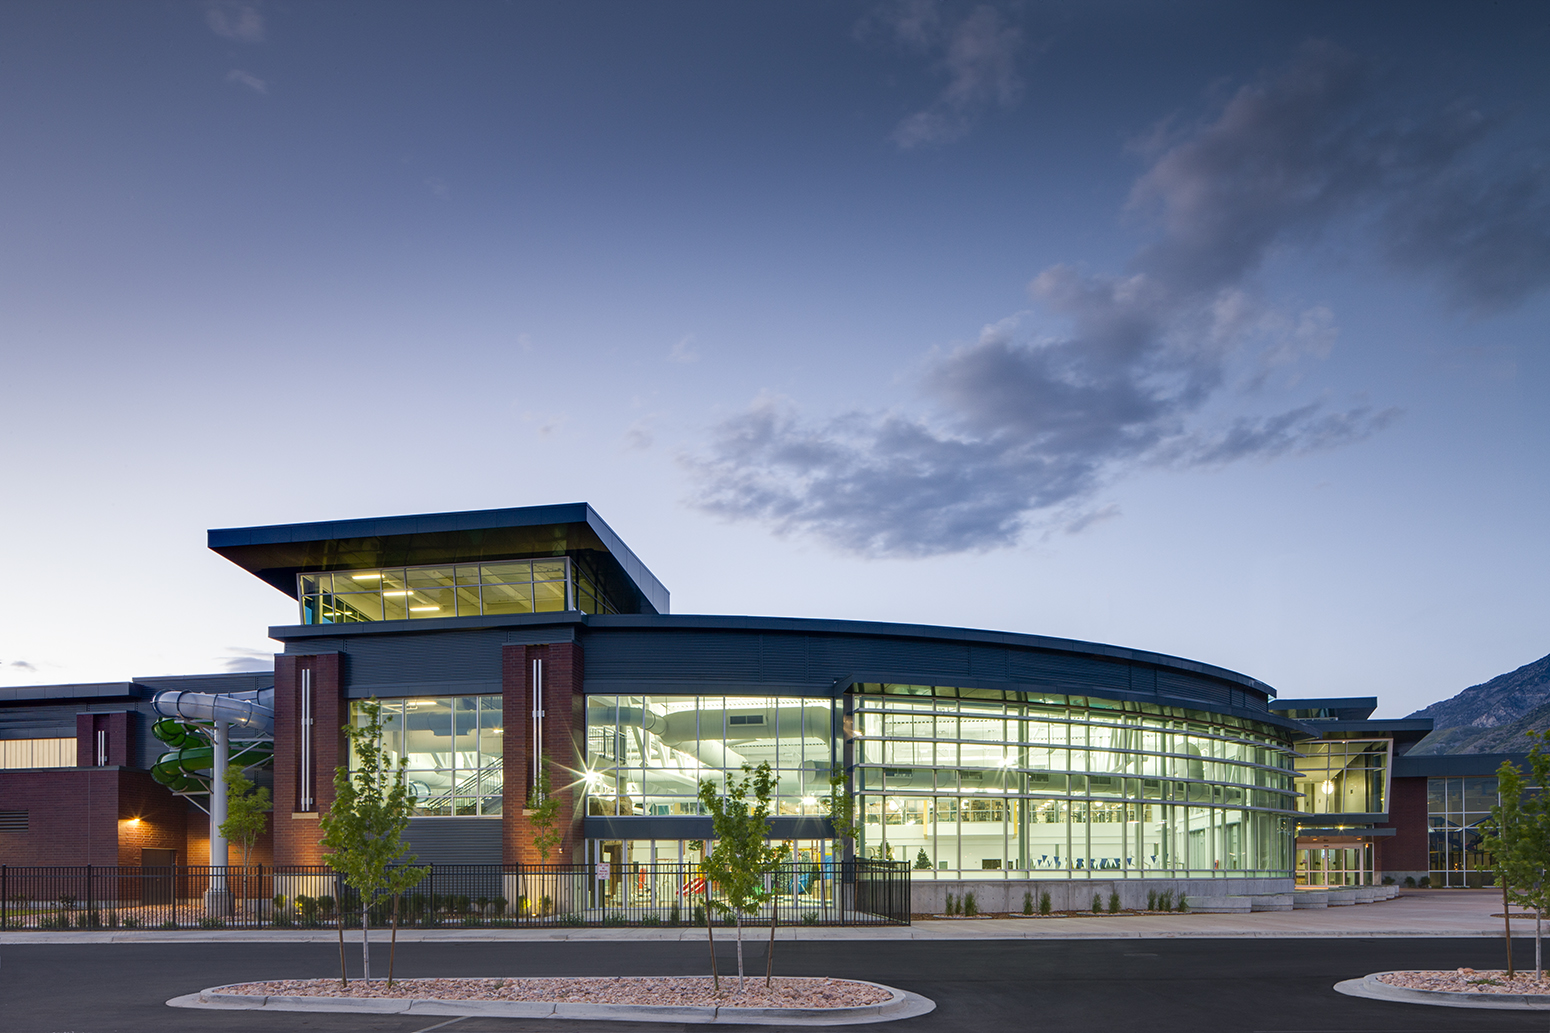 Provo Rec Center for VCBO ArchitectsArchitectural Photography by: Paul Richer / RICHER IMAGES